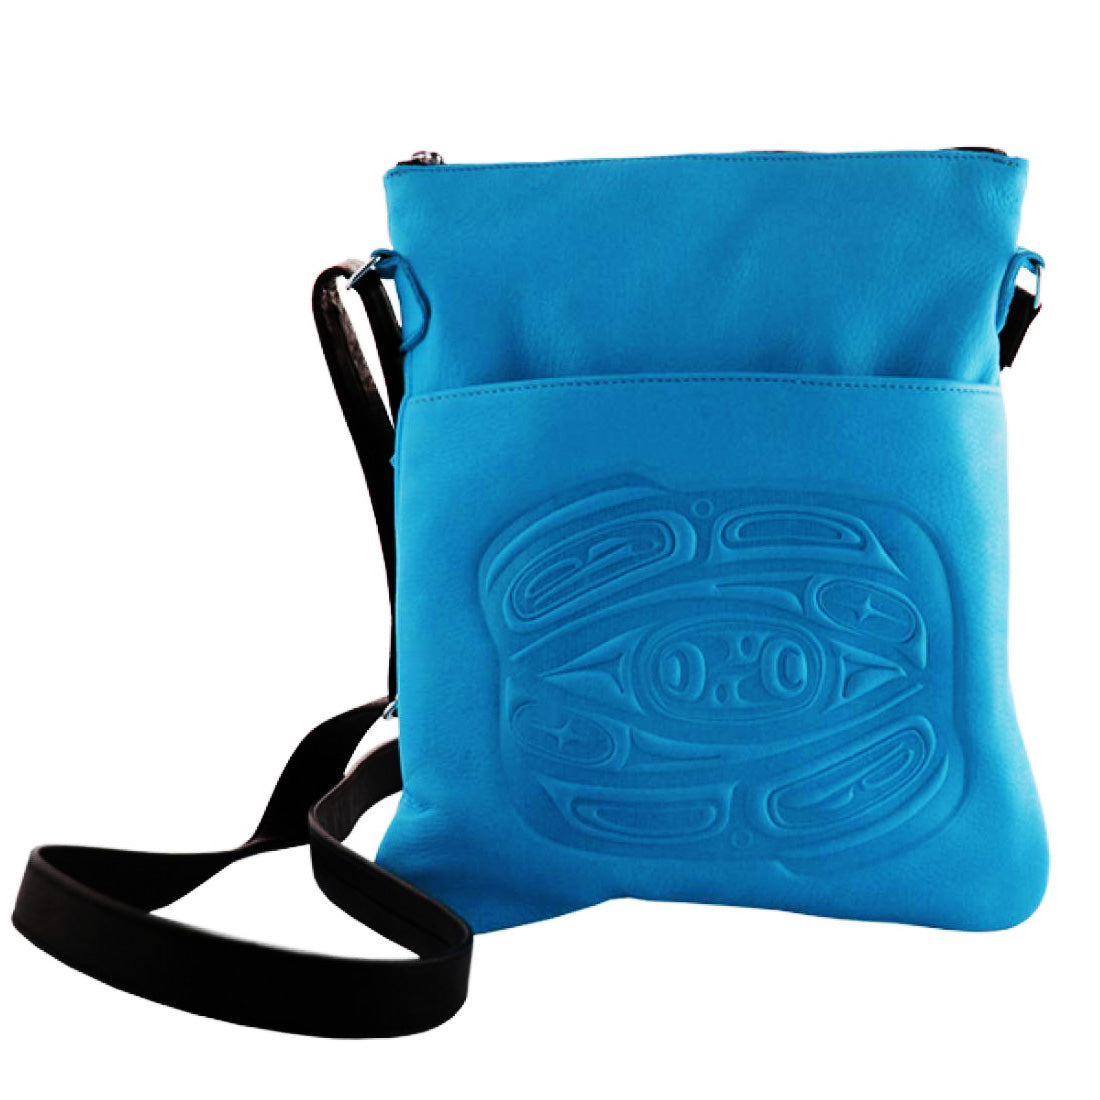 Raven Embossed Solo Bag - Turquoise, Deer Skin Leather